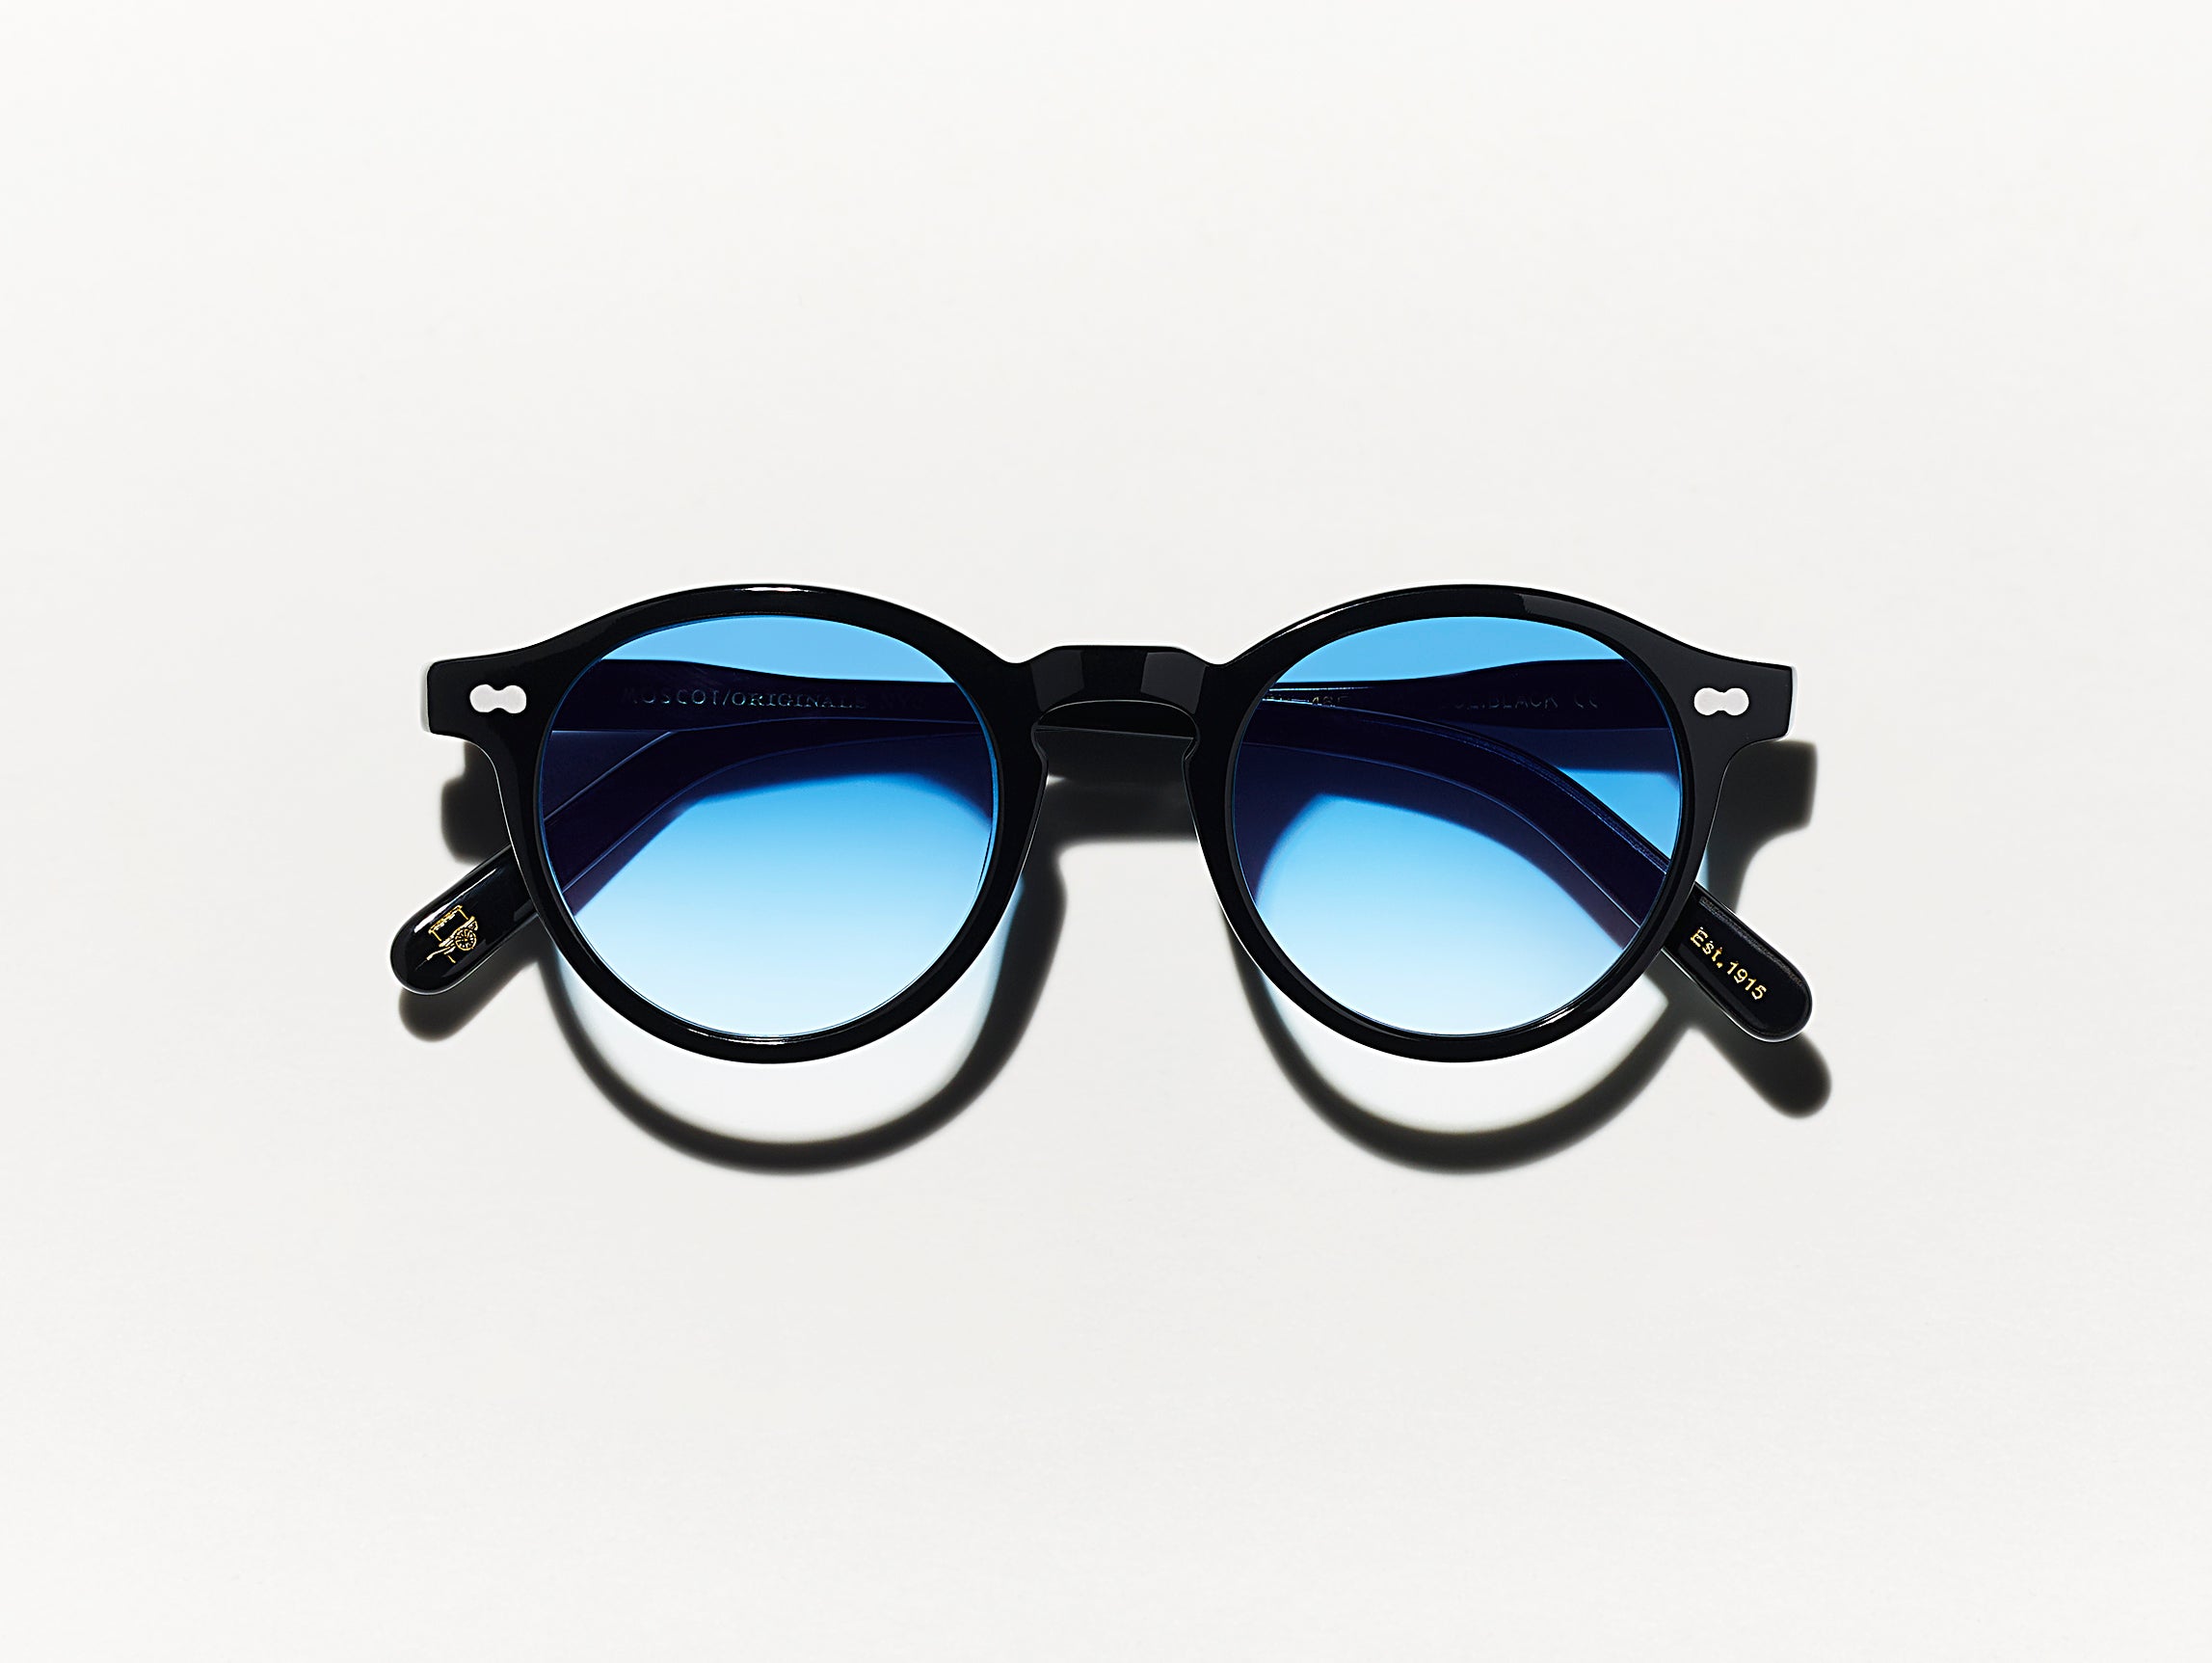 The MILTZEN Black with Broadway Blue Fade Tinted Lenses